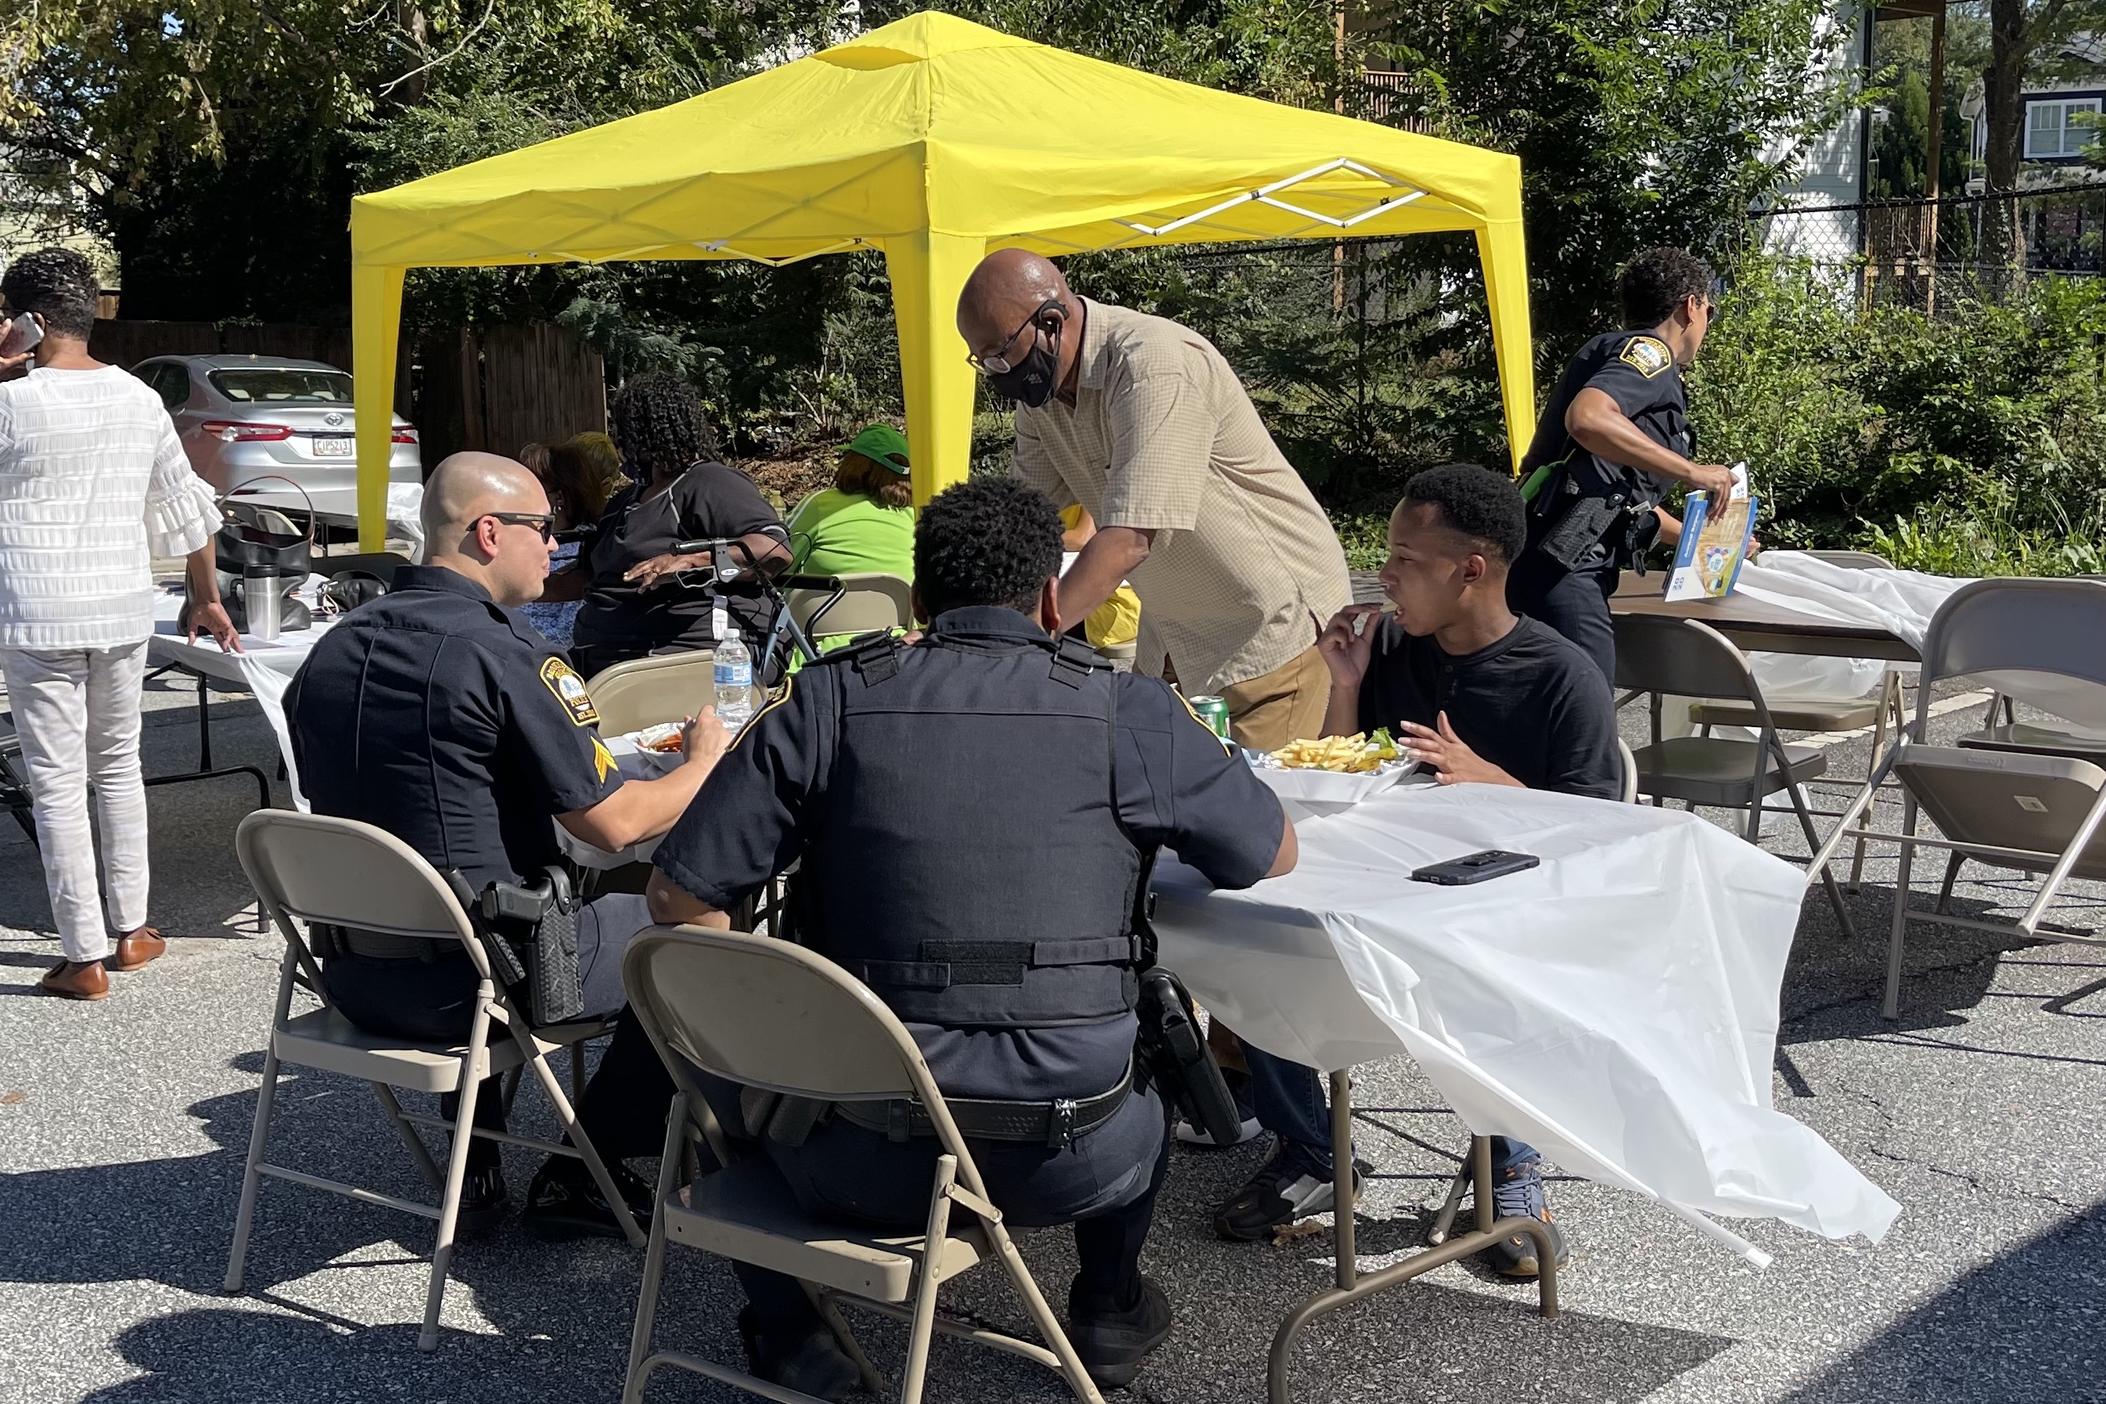 Brookhaven police officers share a meal with members of the community.